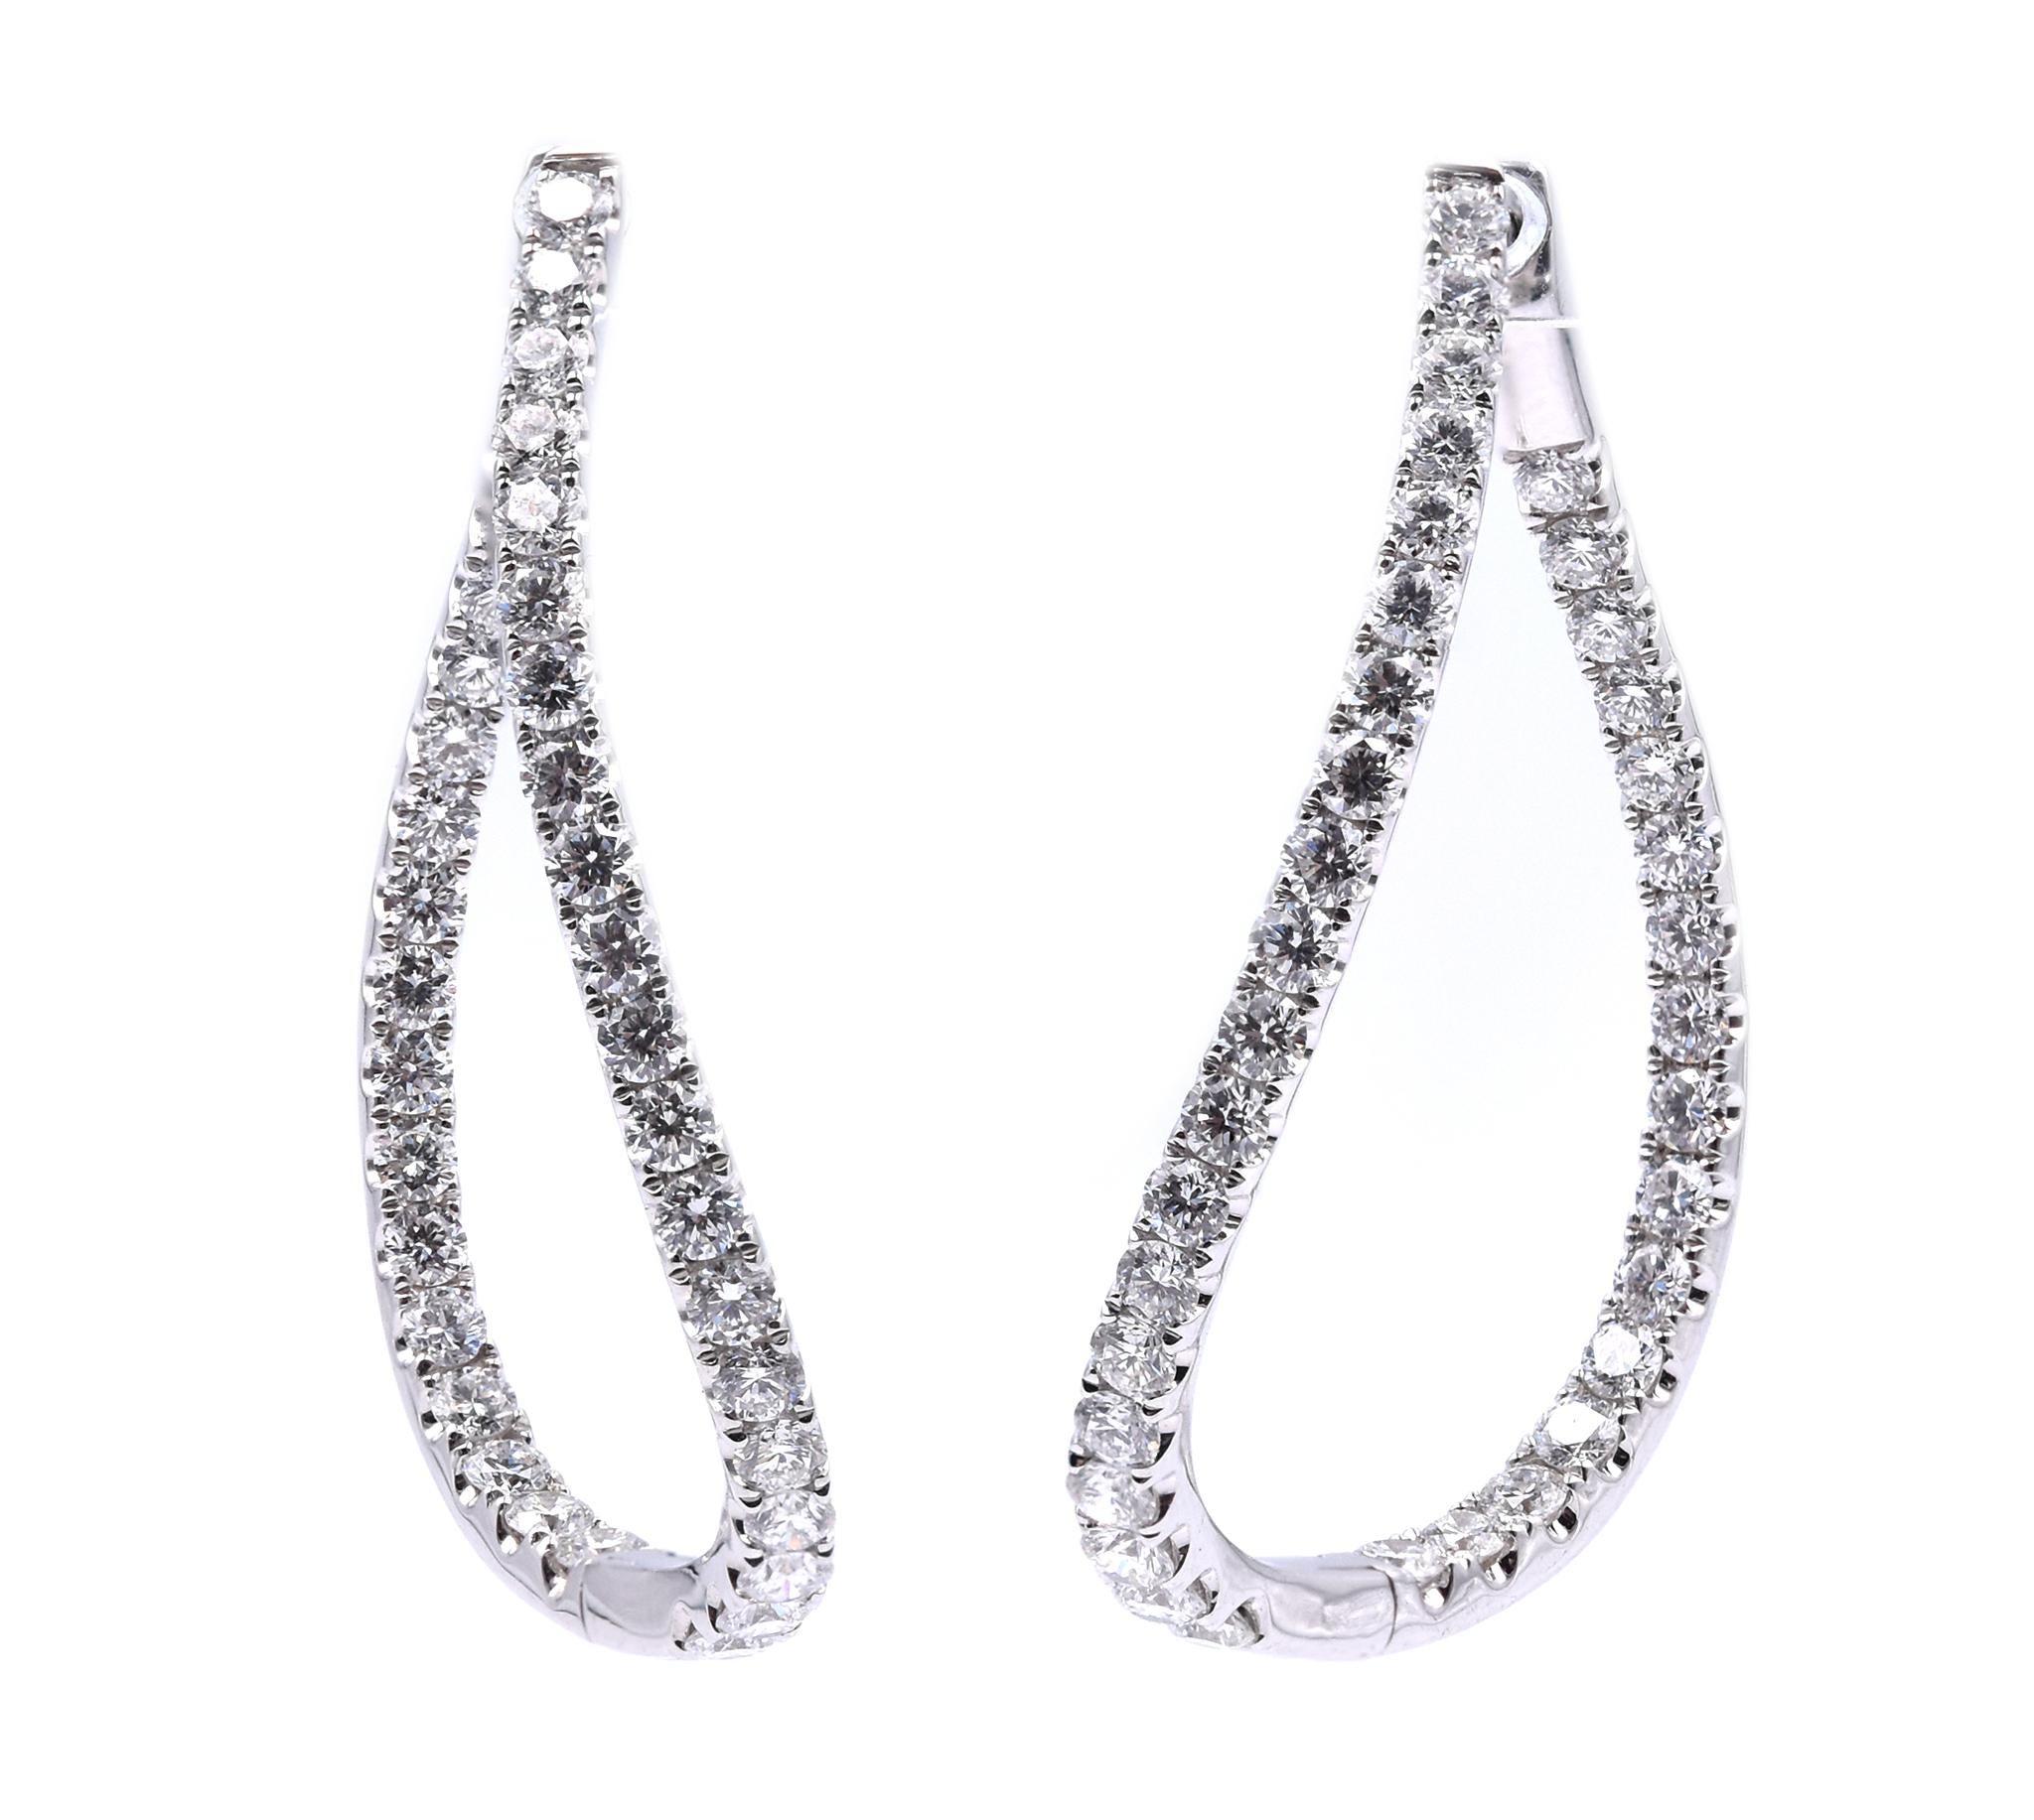 Designer: custom
Material: 14K white gold
Diamonds: 72 round cut = 3.49cttw
Color: G
Clarity: VS1
Dimensions: earrings measure 40mm long
Weight: 10.29 grams
